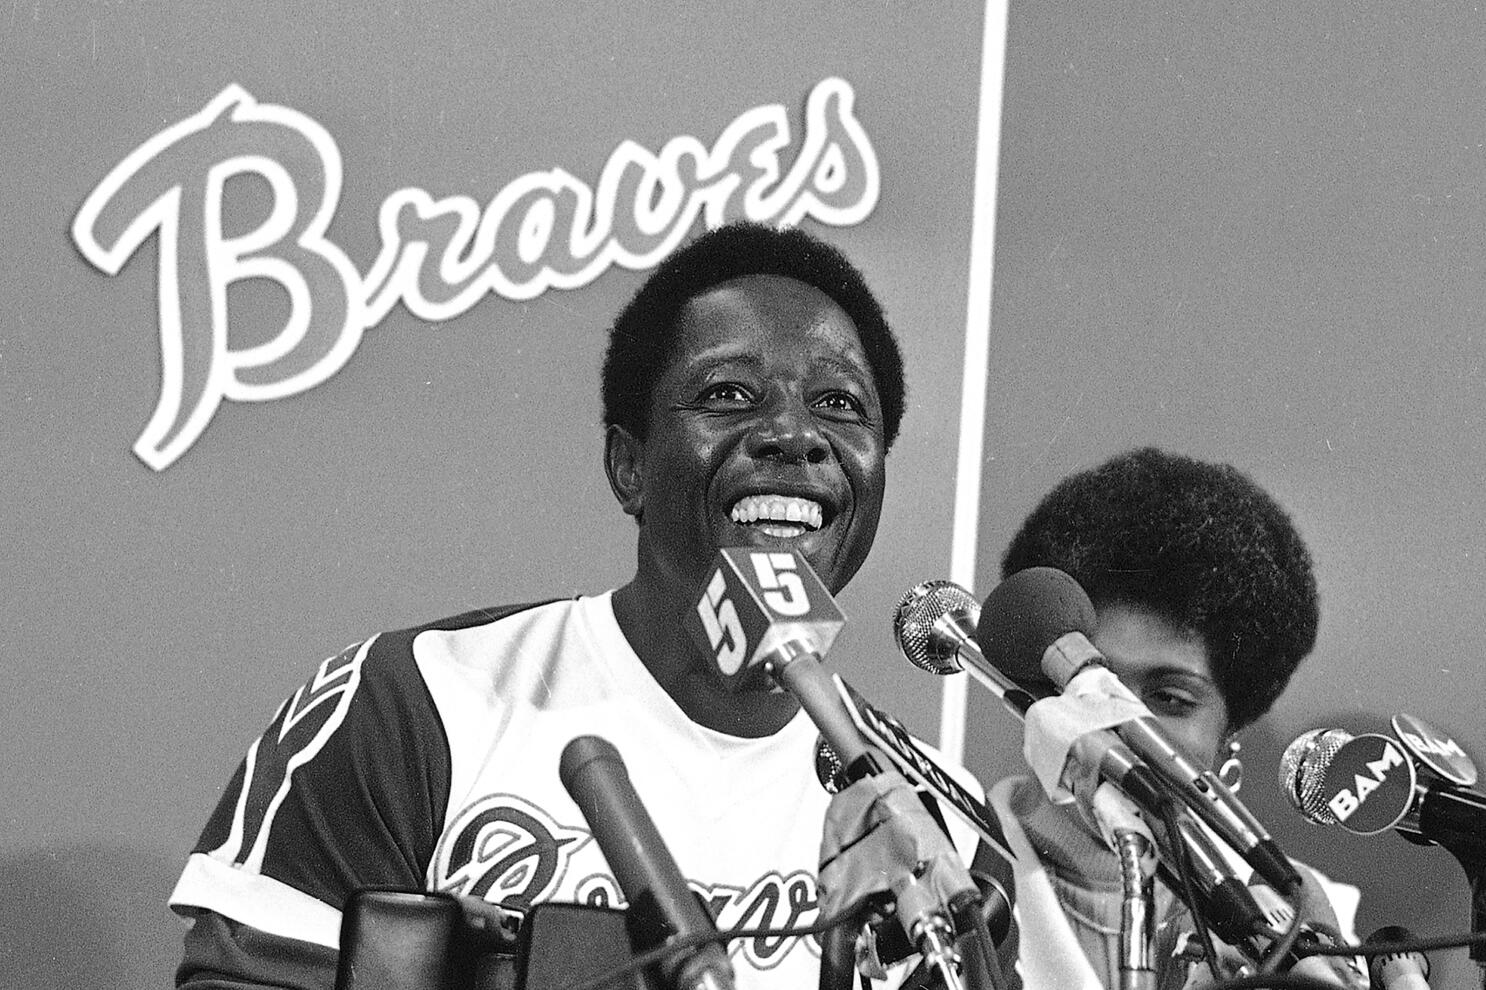 A personal hero': Georgia Reacts To Hank Aaron's Death At 86